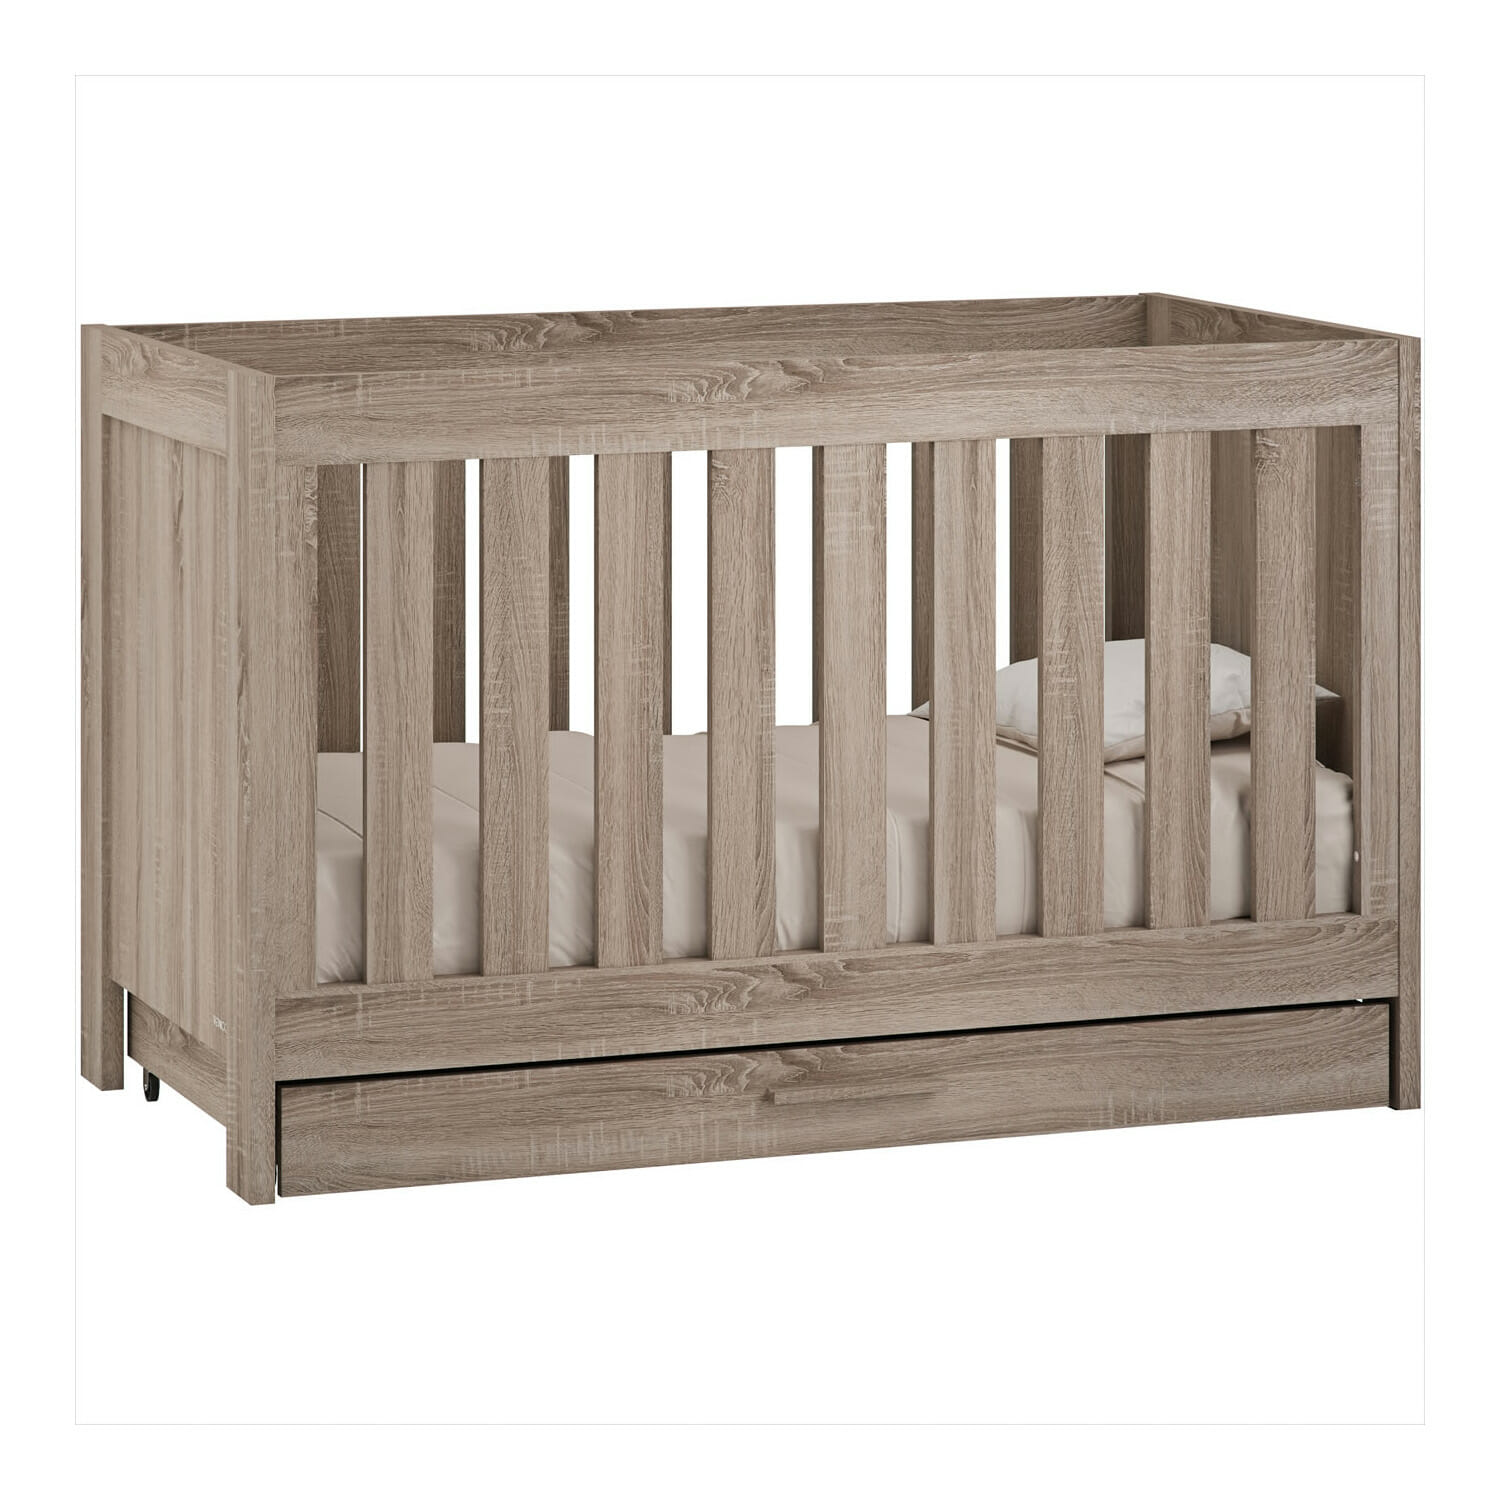 Venicci Forenzo Cot Bed with Underdrawer - Truffle Oak